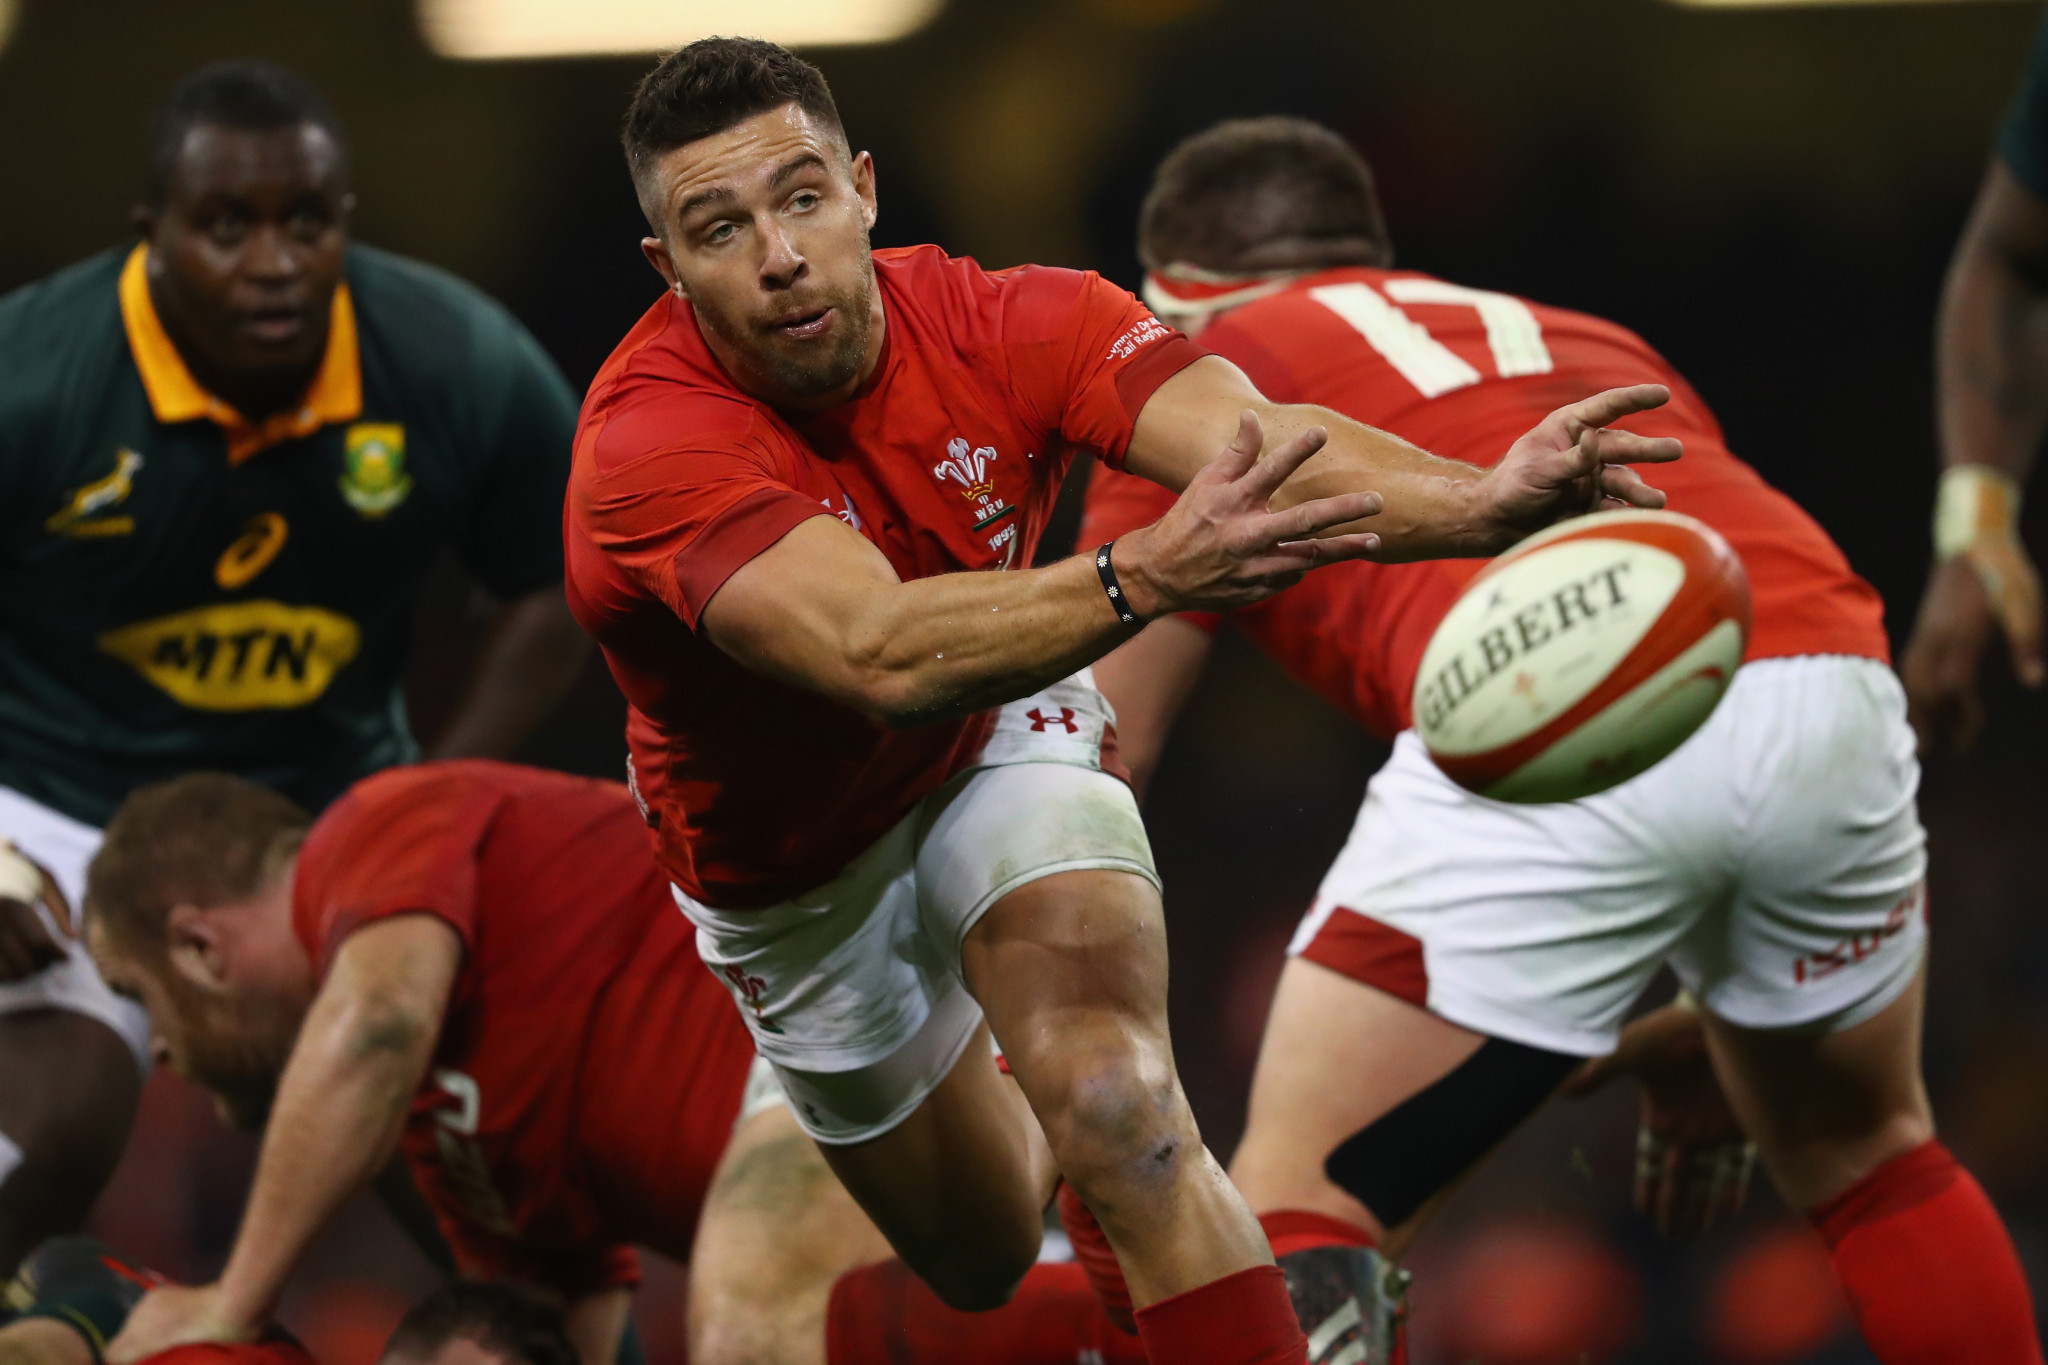 A compromise was negotiated to allow rugby player Rhys Webb to continue representing Wales after transferring to French club Toulon. This seems preferable to a legal dispute ©Getty Images